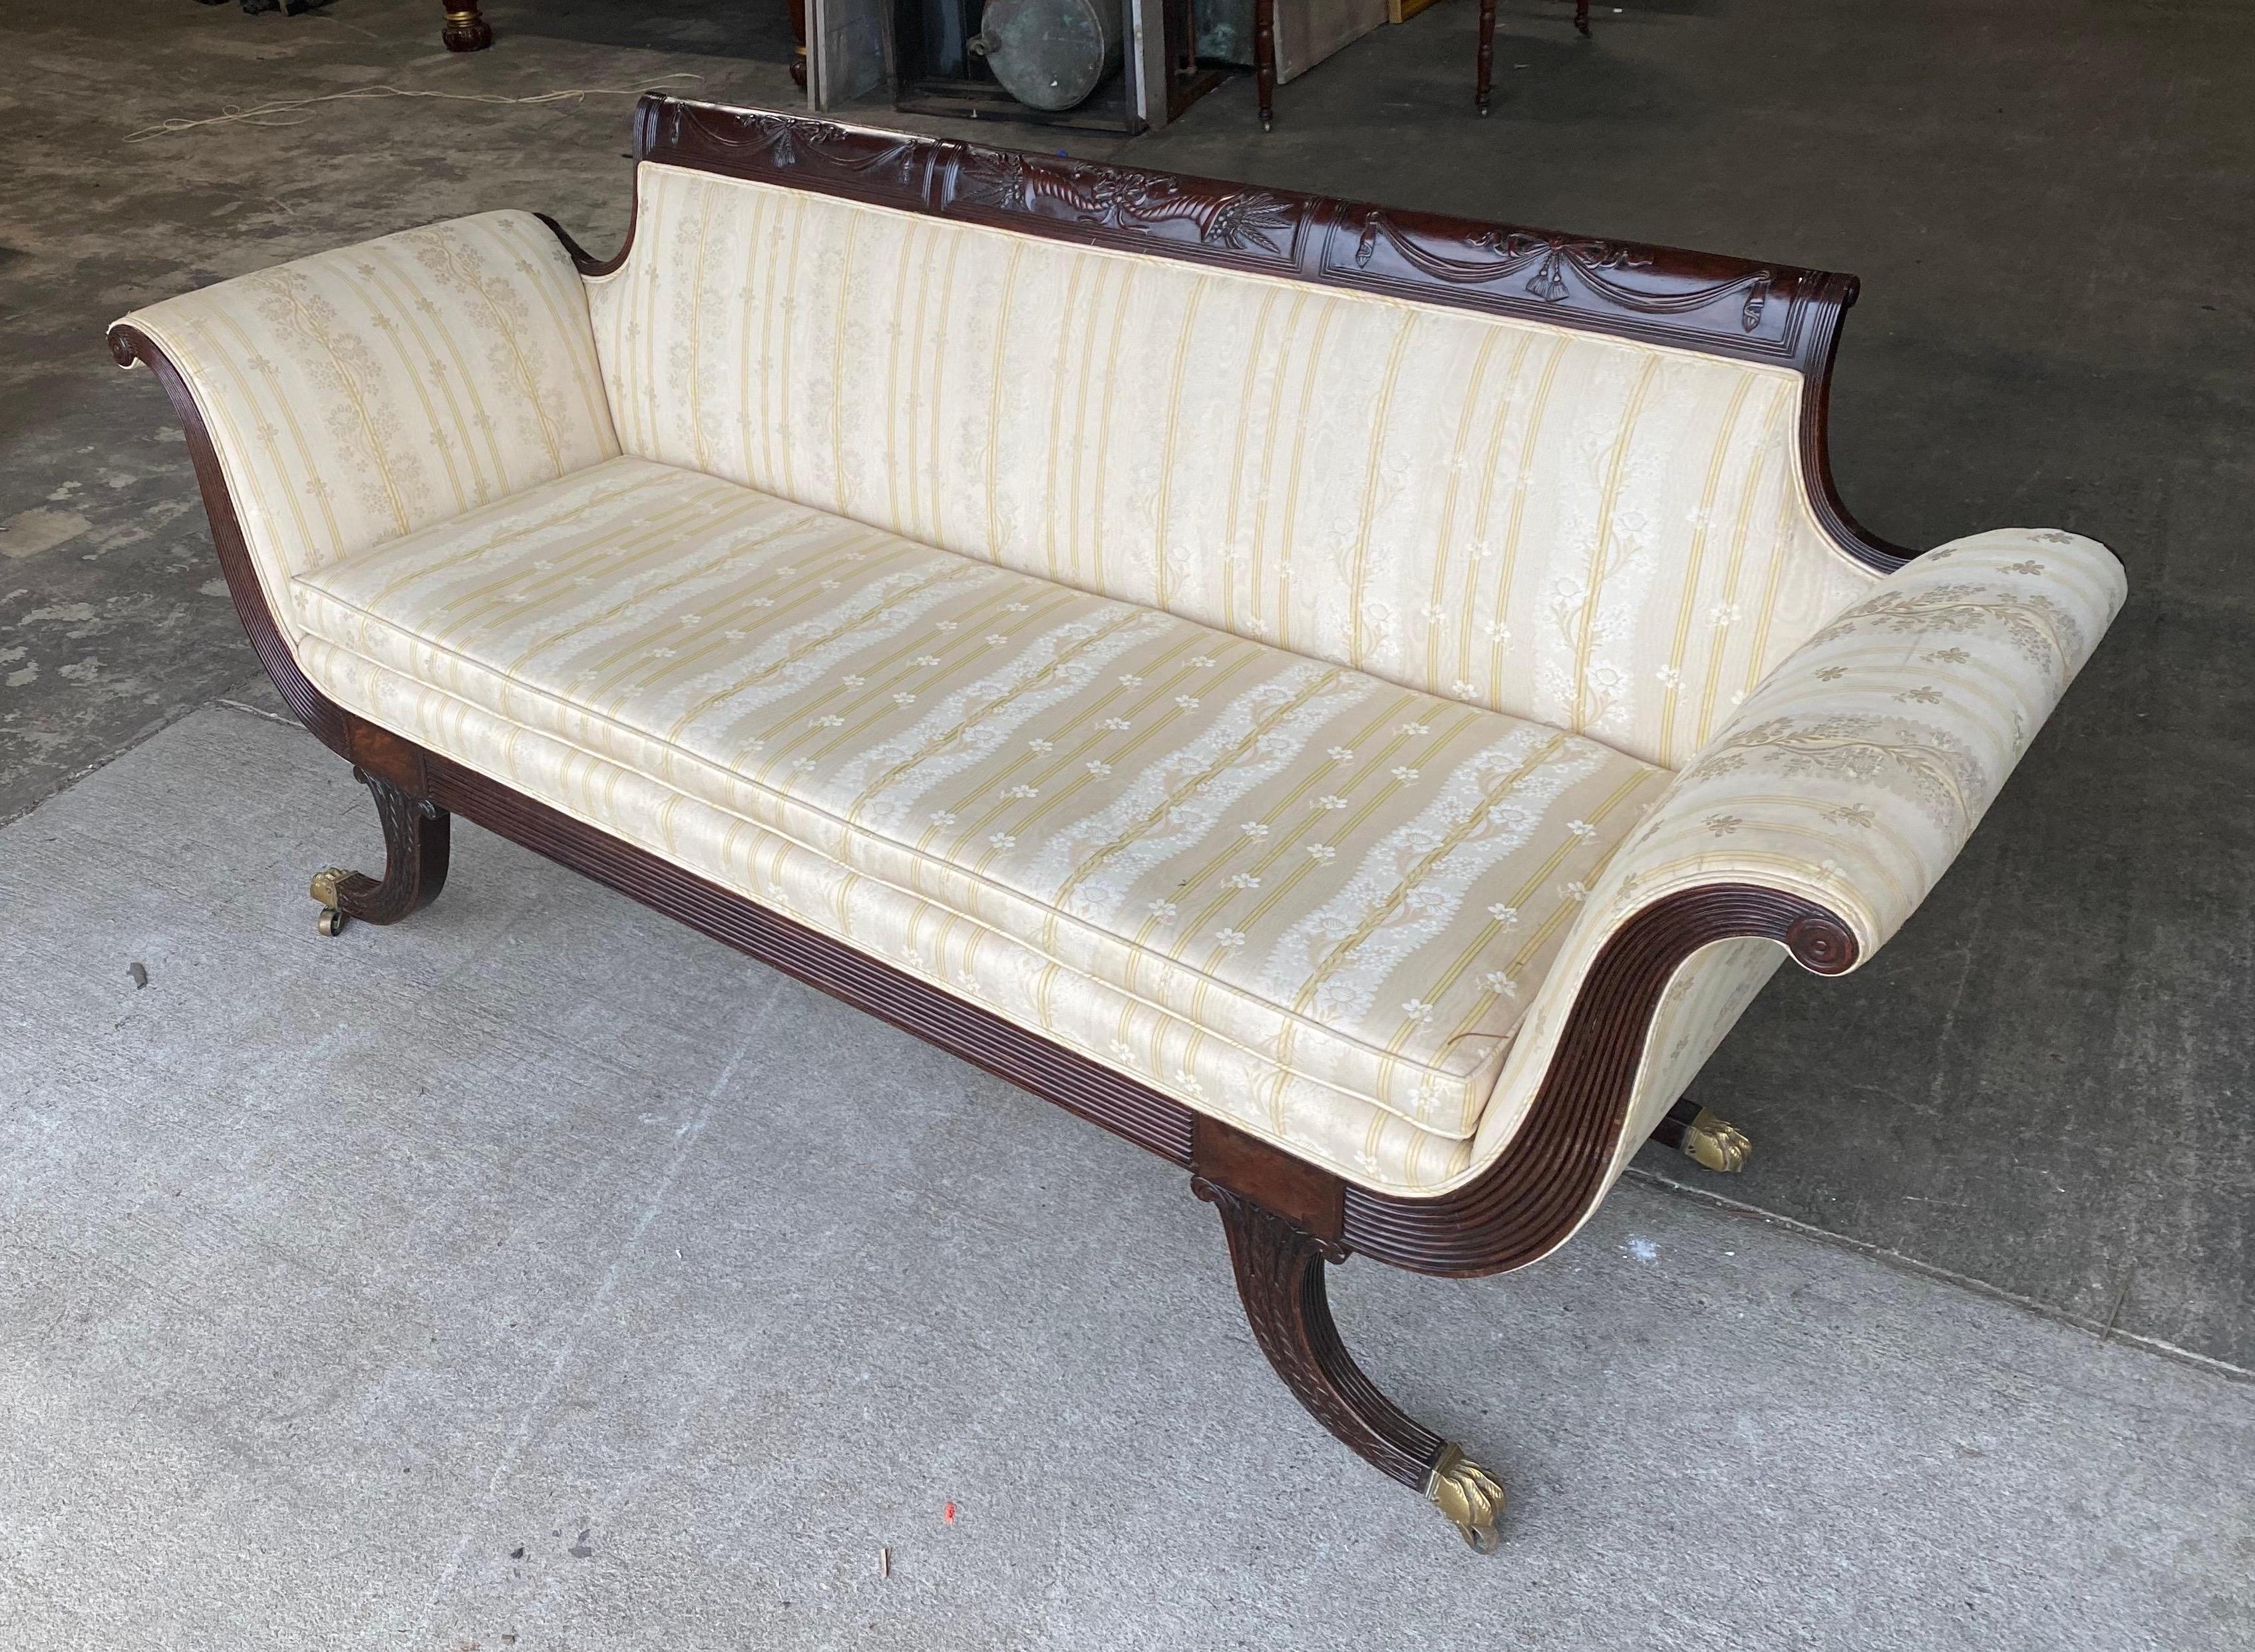 Great example of an early 19th century New York sofa from the federal period. Probably by Duncan Phyfe. Not marked or signed, but the quality and pattern are indicative of his shop. Please see close up photos of of carvings.